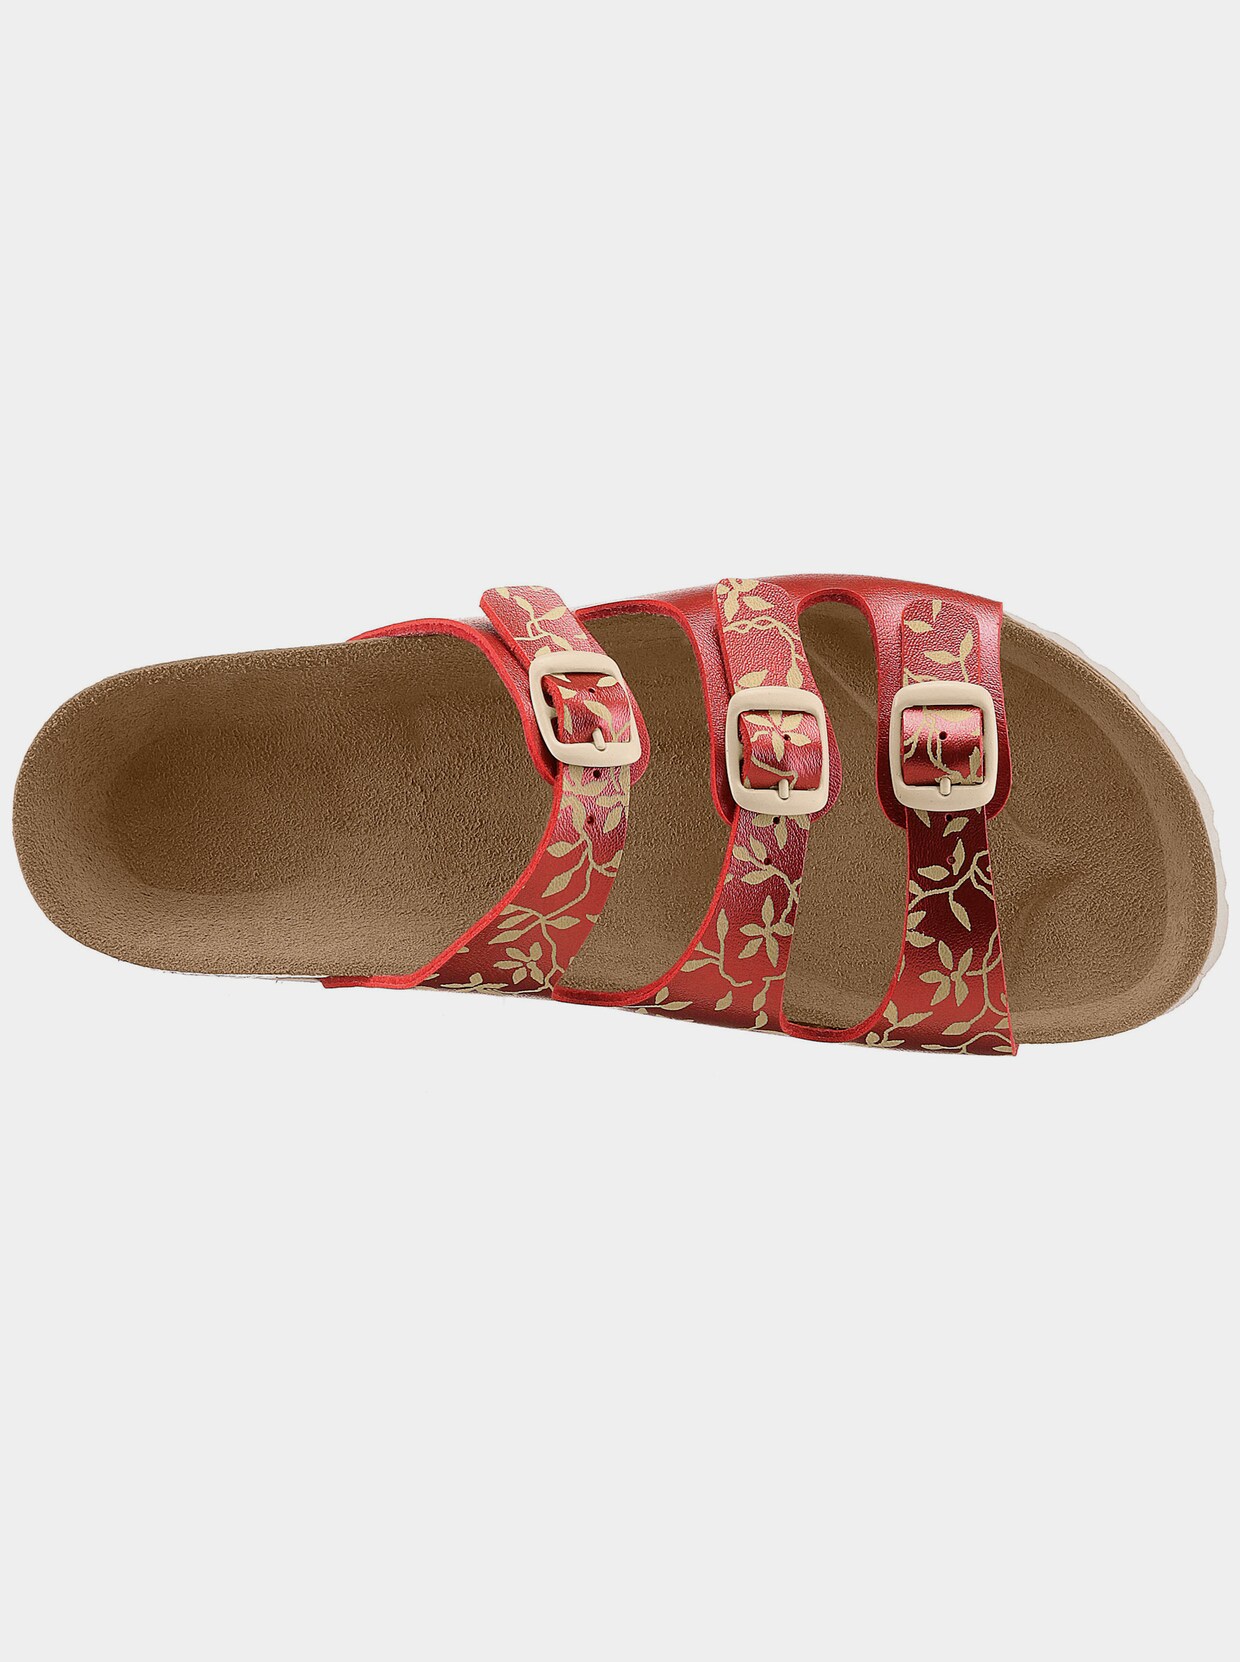 Bio Time slippers - rood geprint